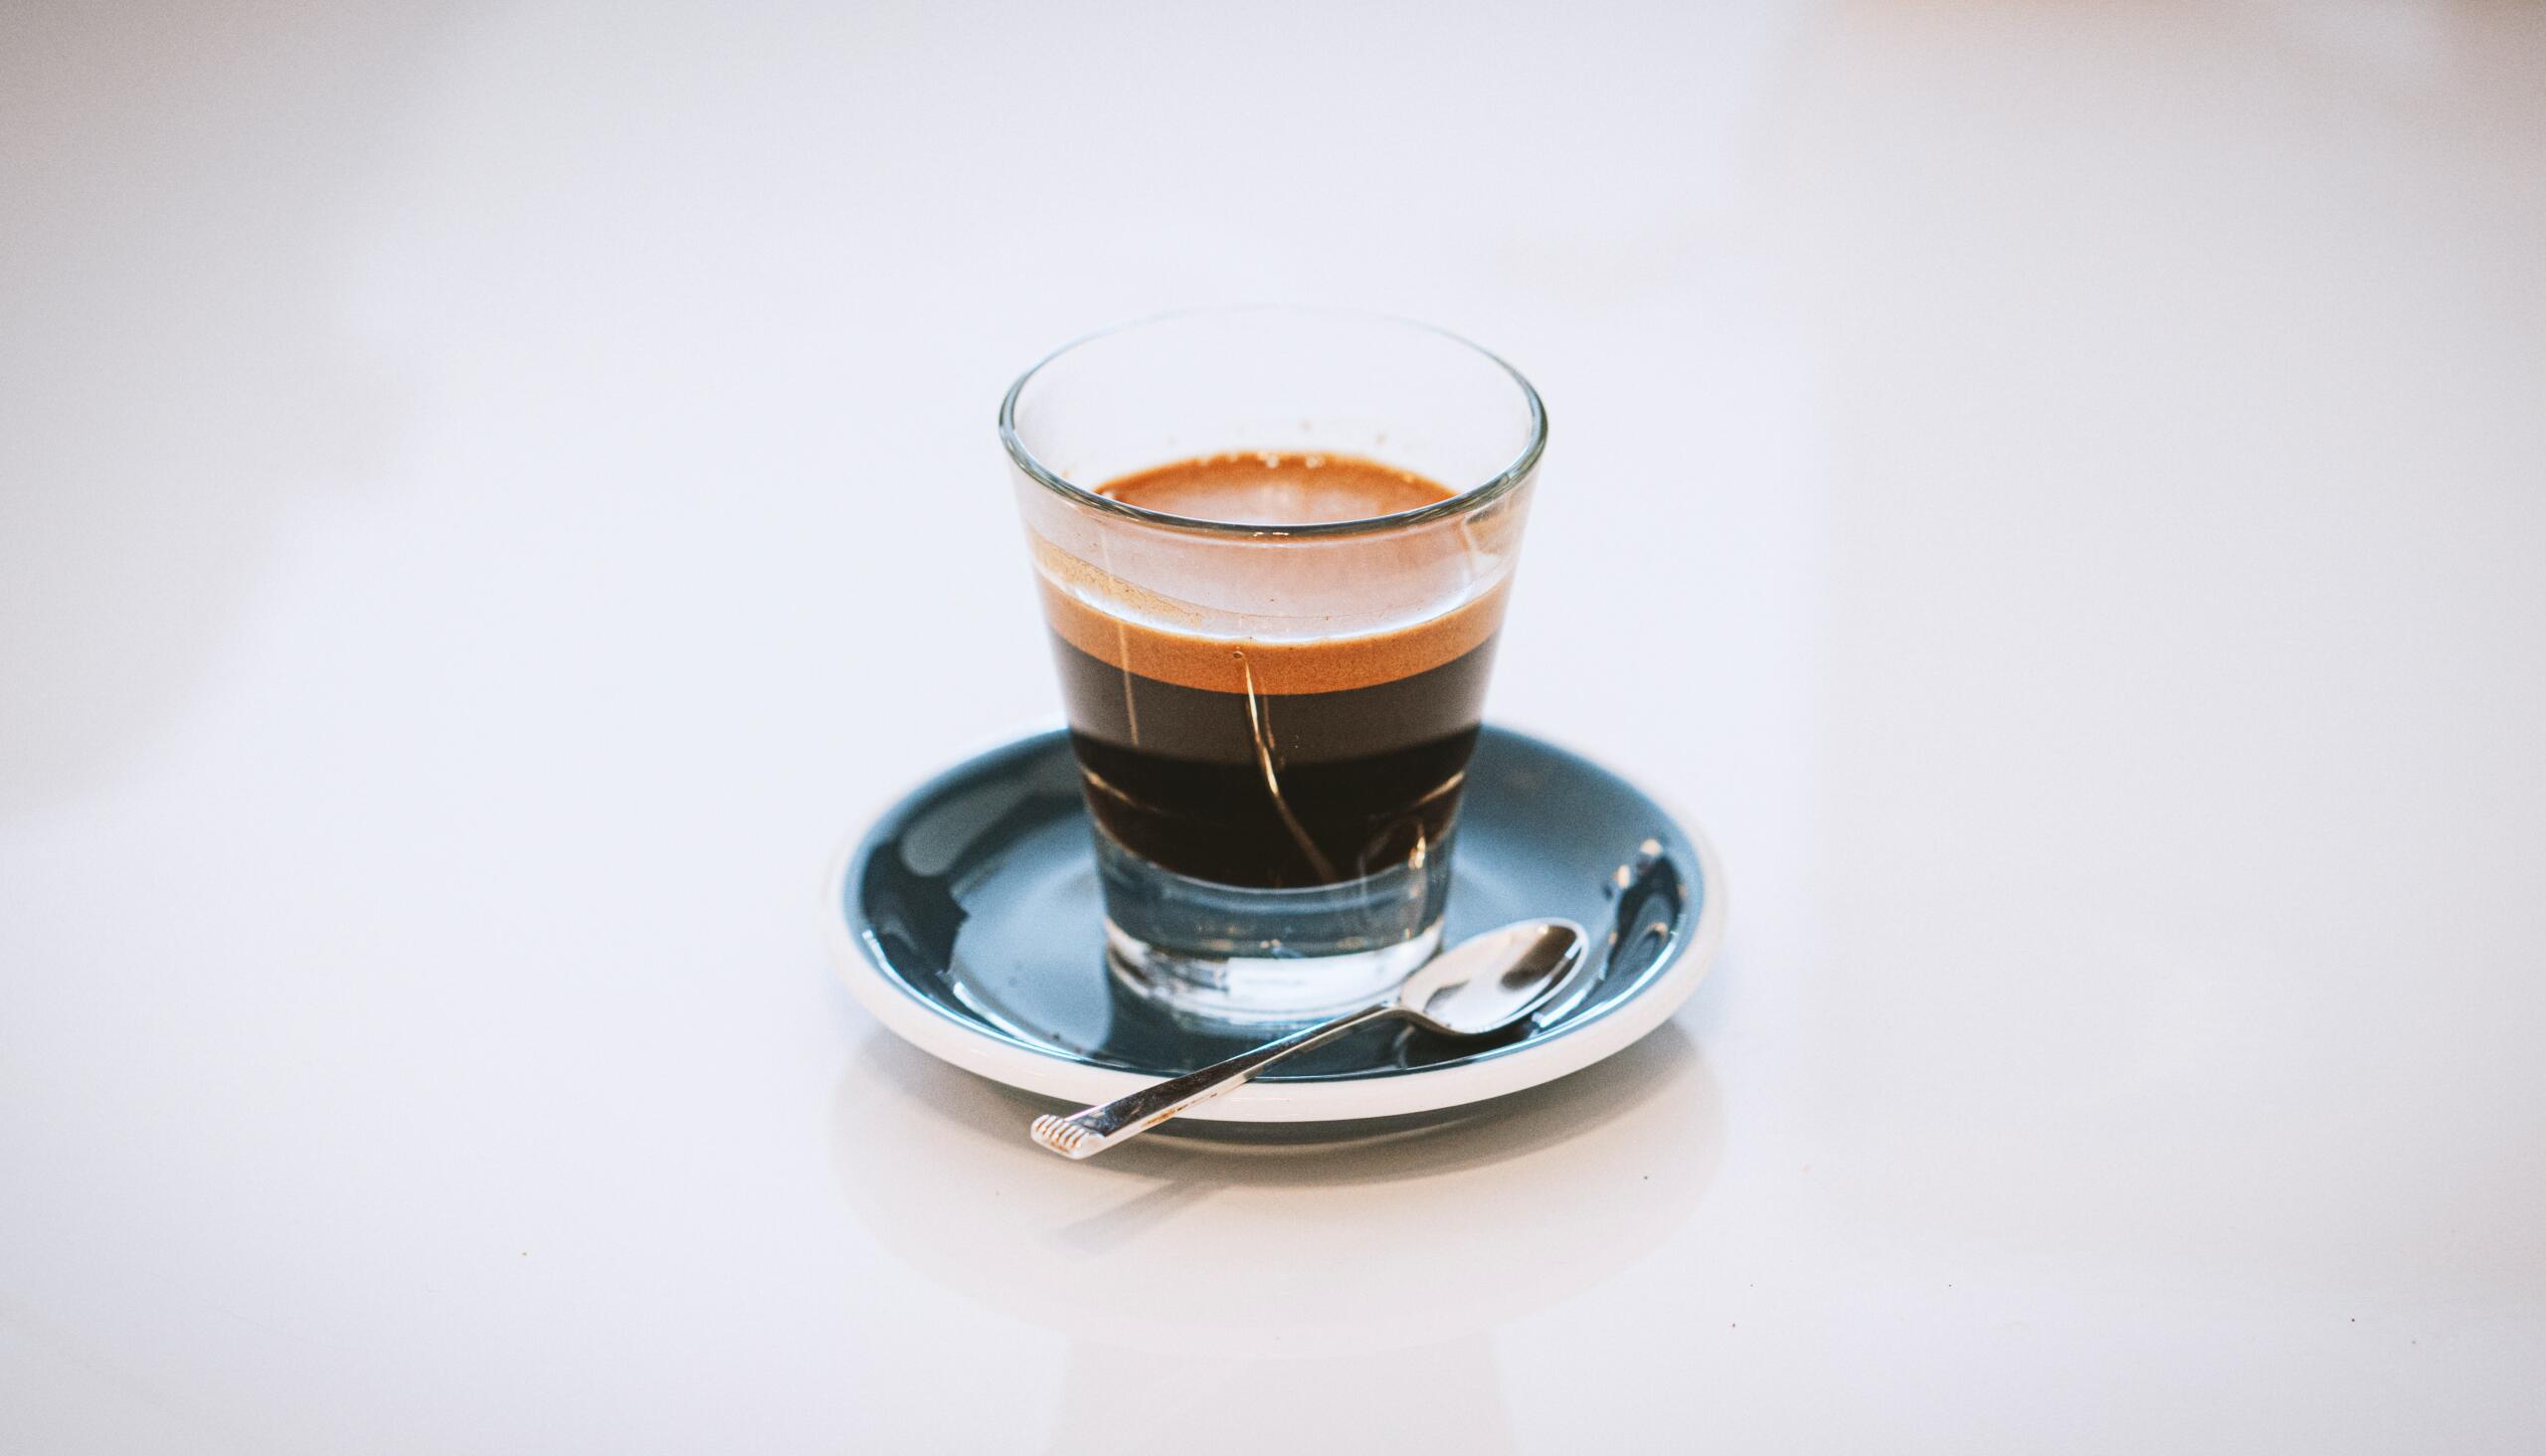 Why Does Espresso Taste Different Than Regular Coffee?